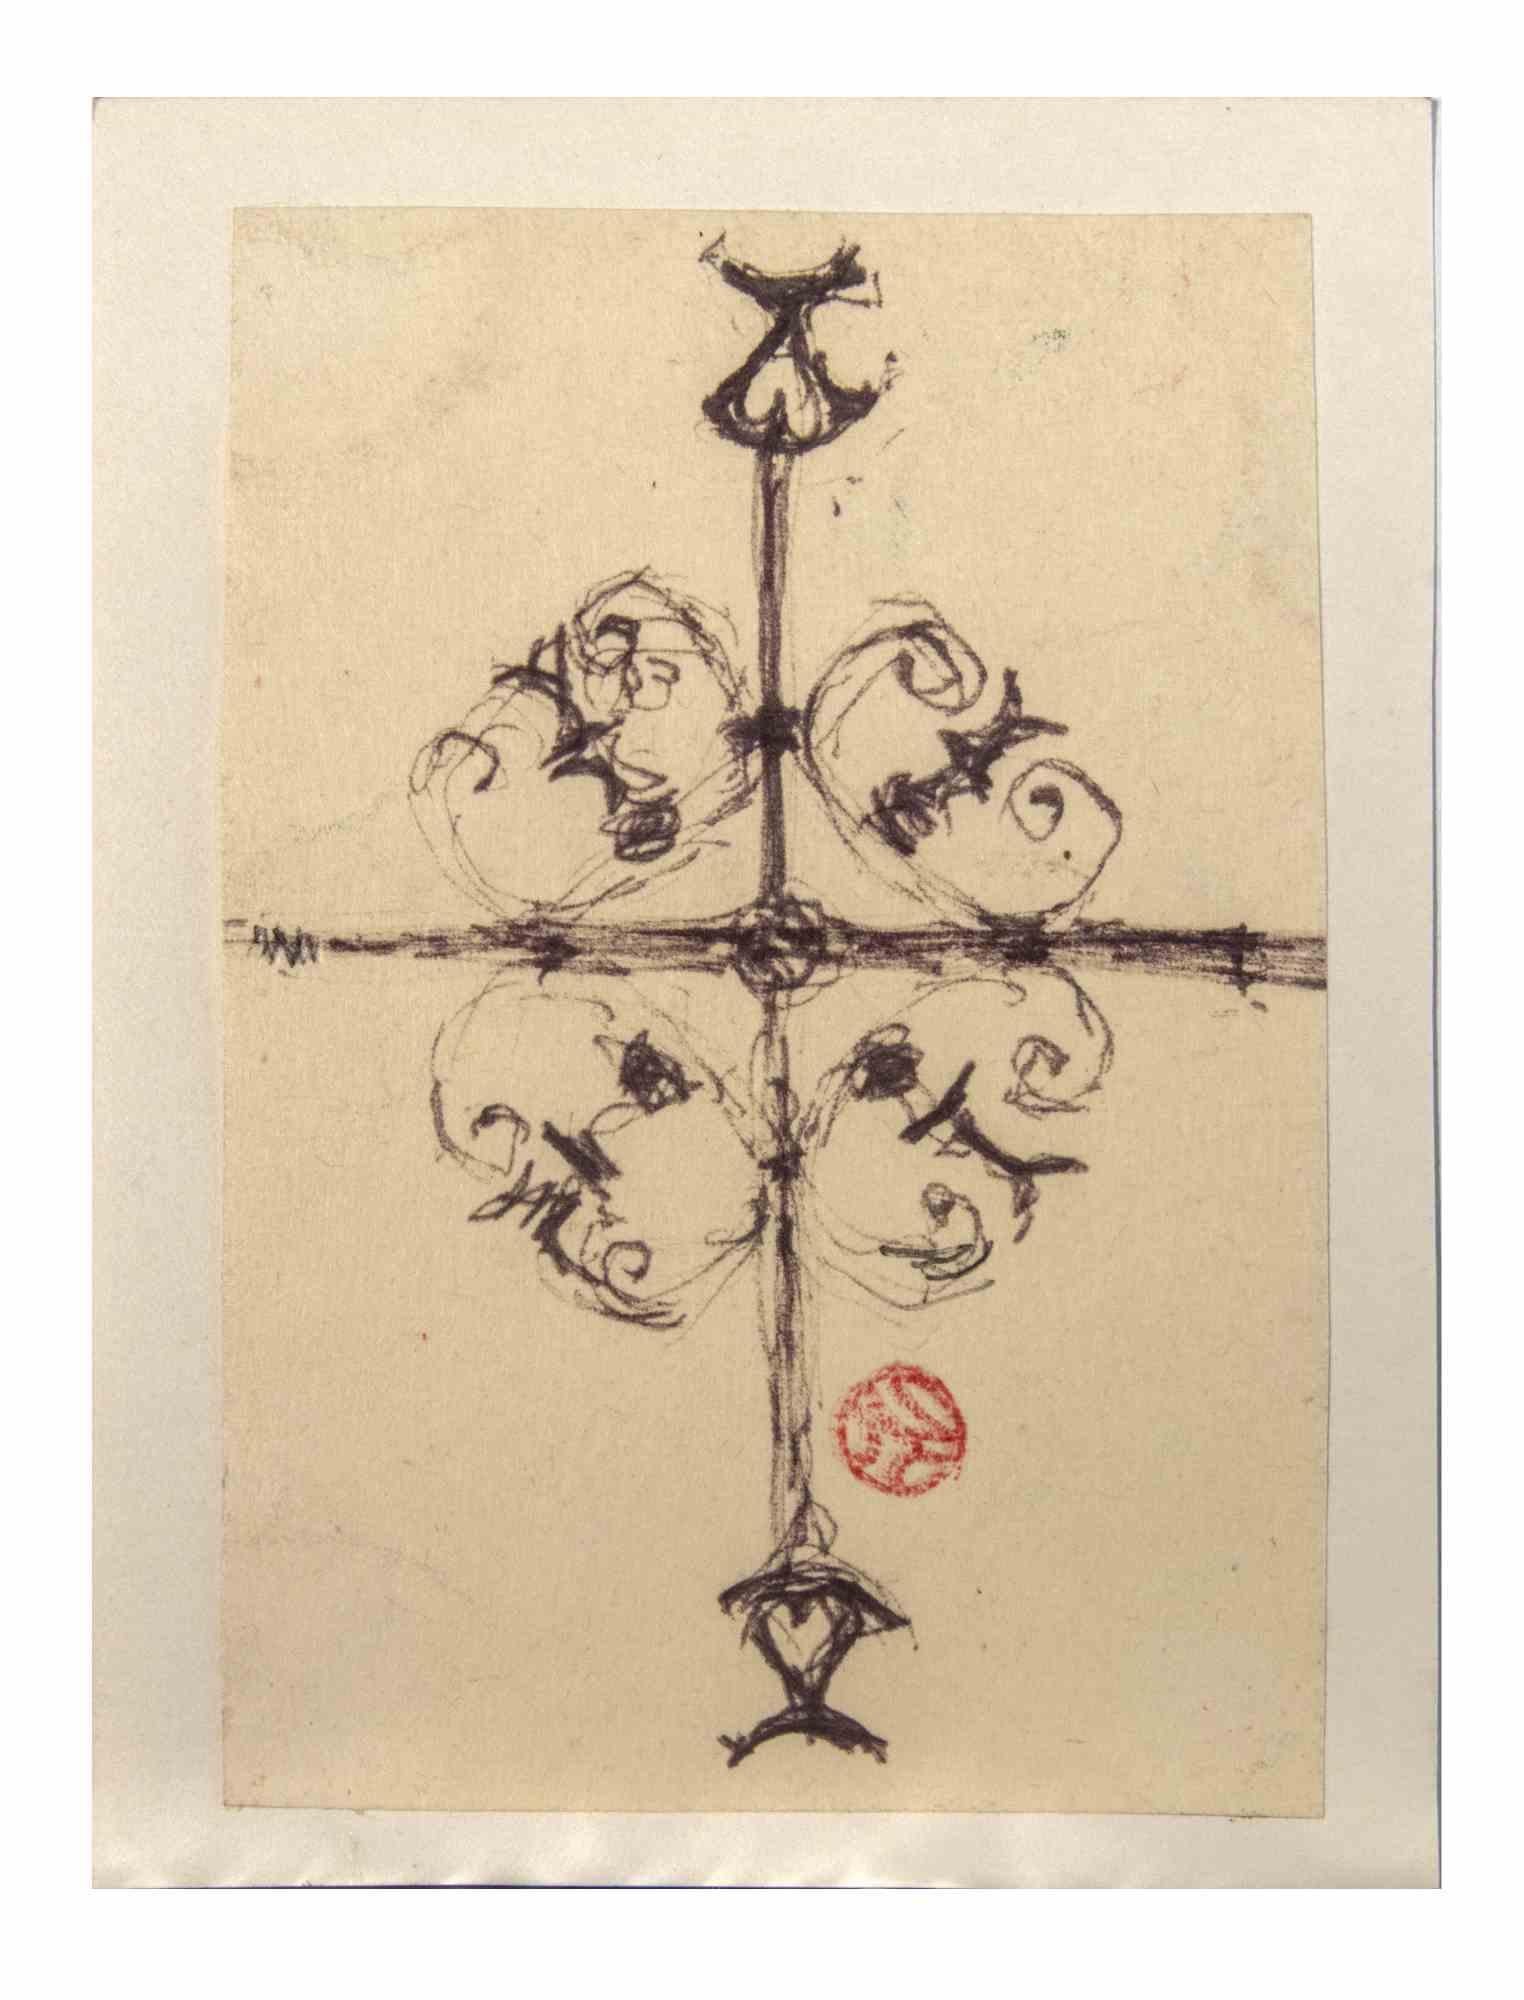 Decorative Cross is a Pastel drawing on paper realized in the early 20th Century by Suzanne Tourte.

Hand-signed on the lower.

Good condition with slight foxing.

The artwork is realized beautifully through deft strokes.